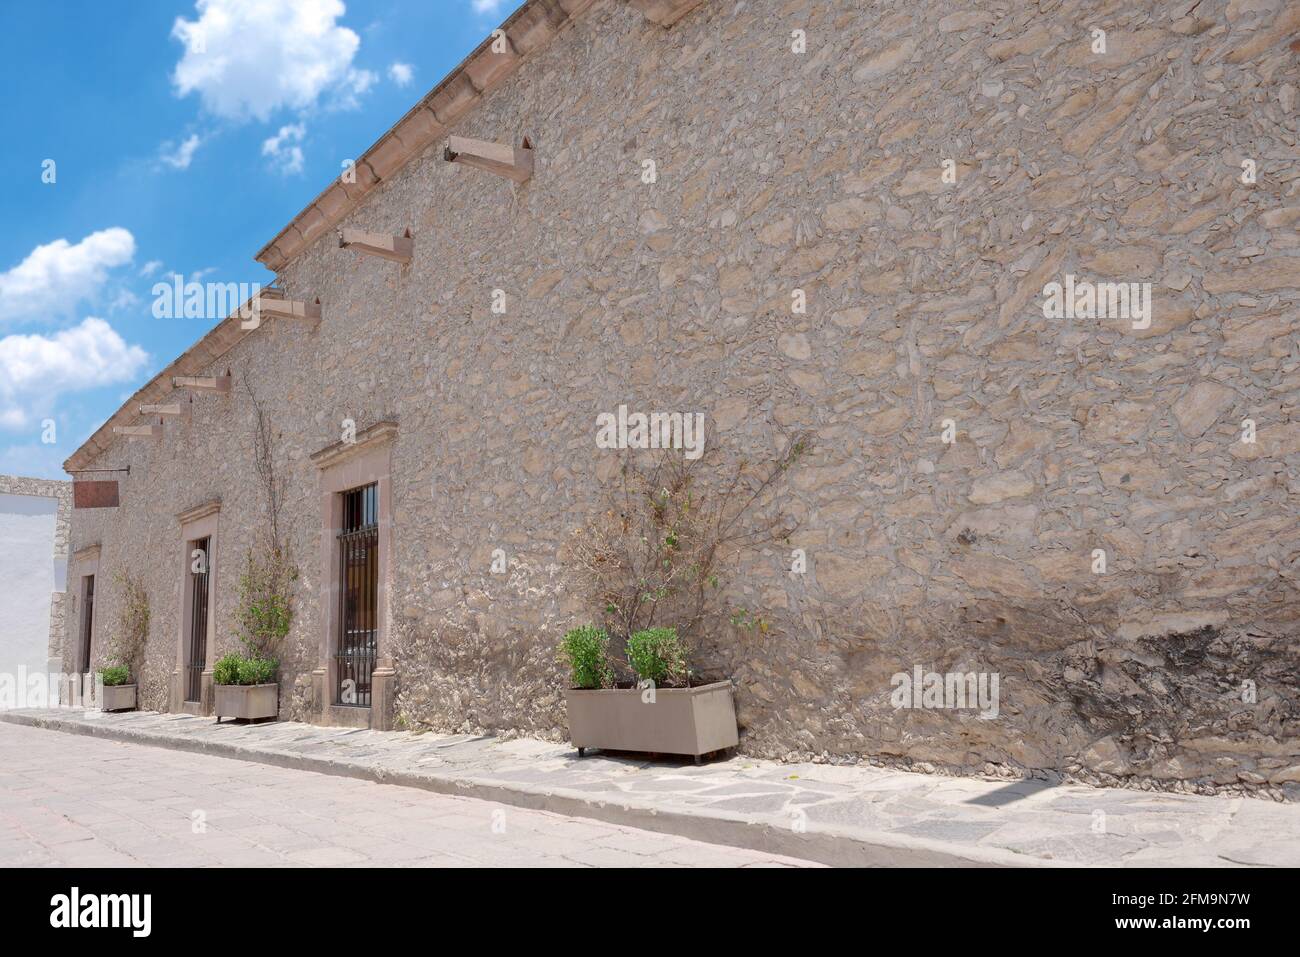 Mexican house with desert architecture, sunny day, no people and flowerpots at the entrance Stock Photo